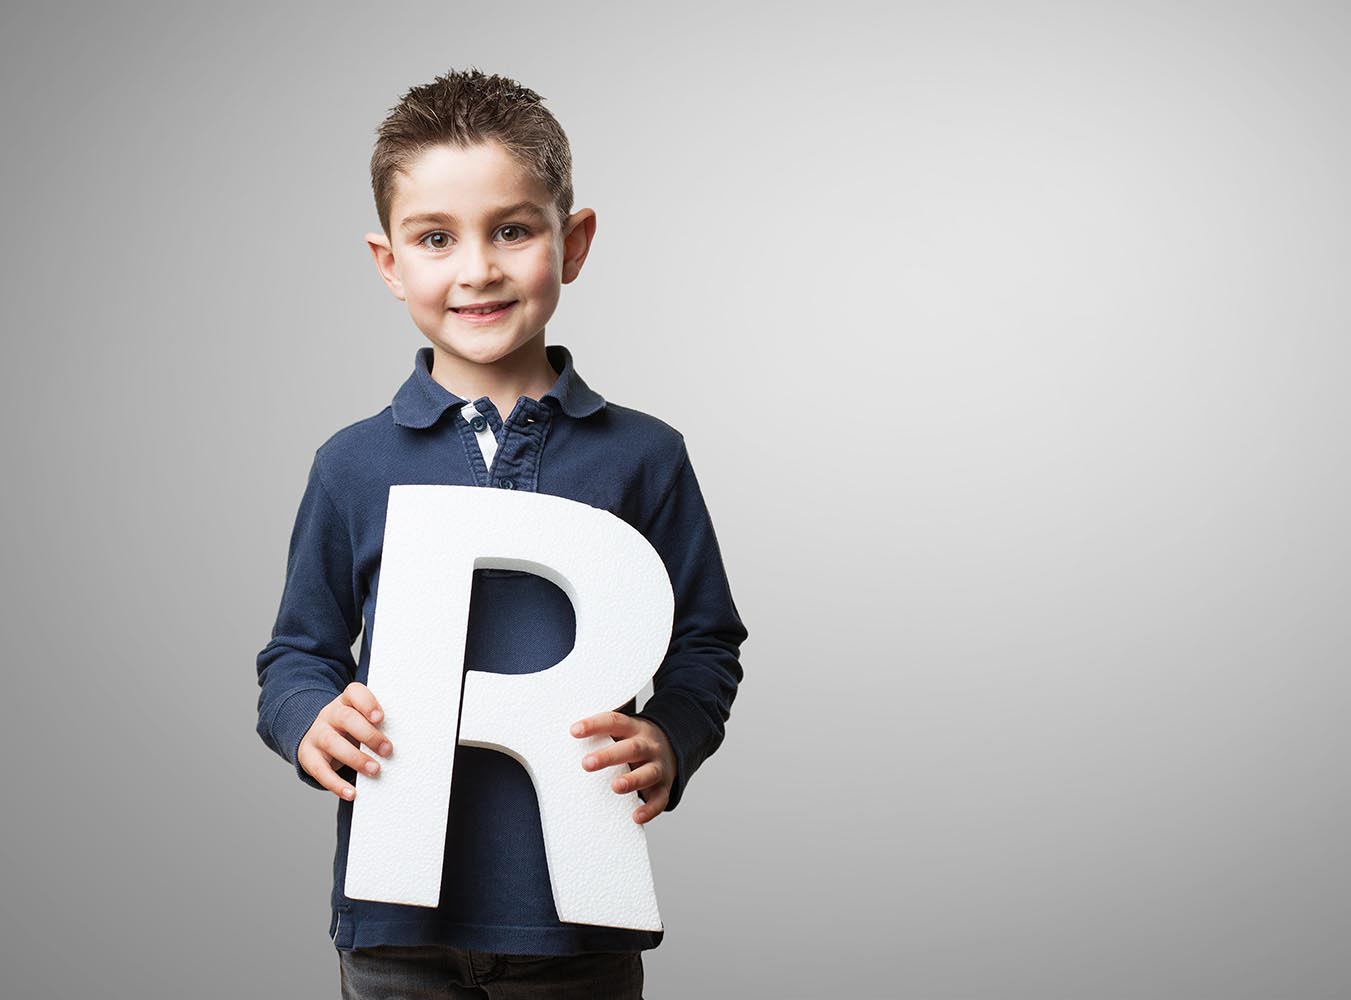 Child Holding Letter R in Hand